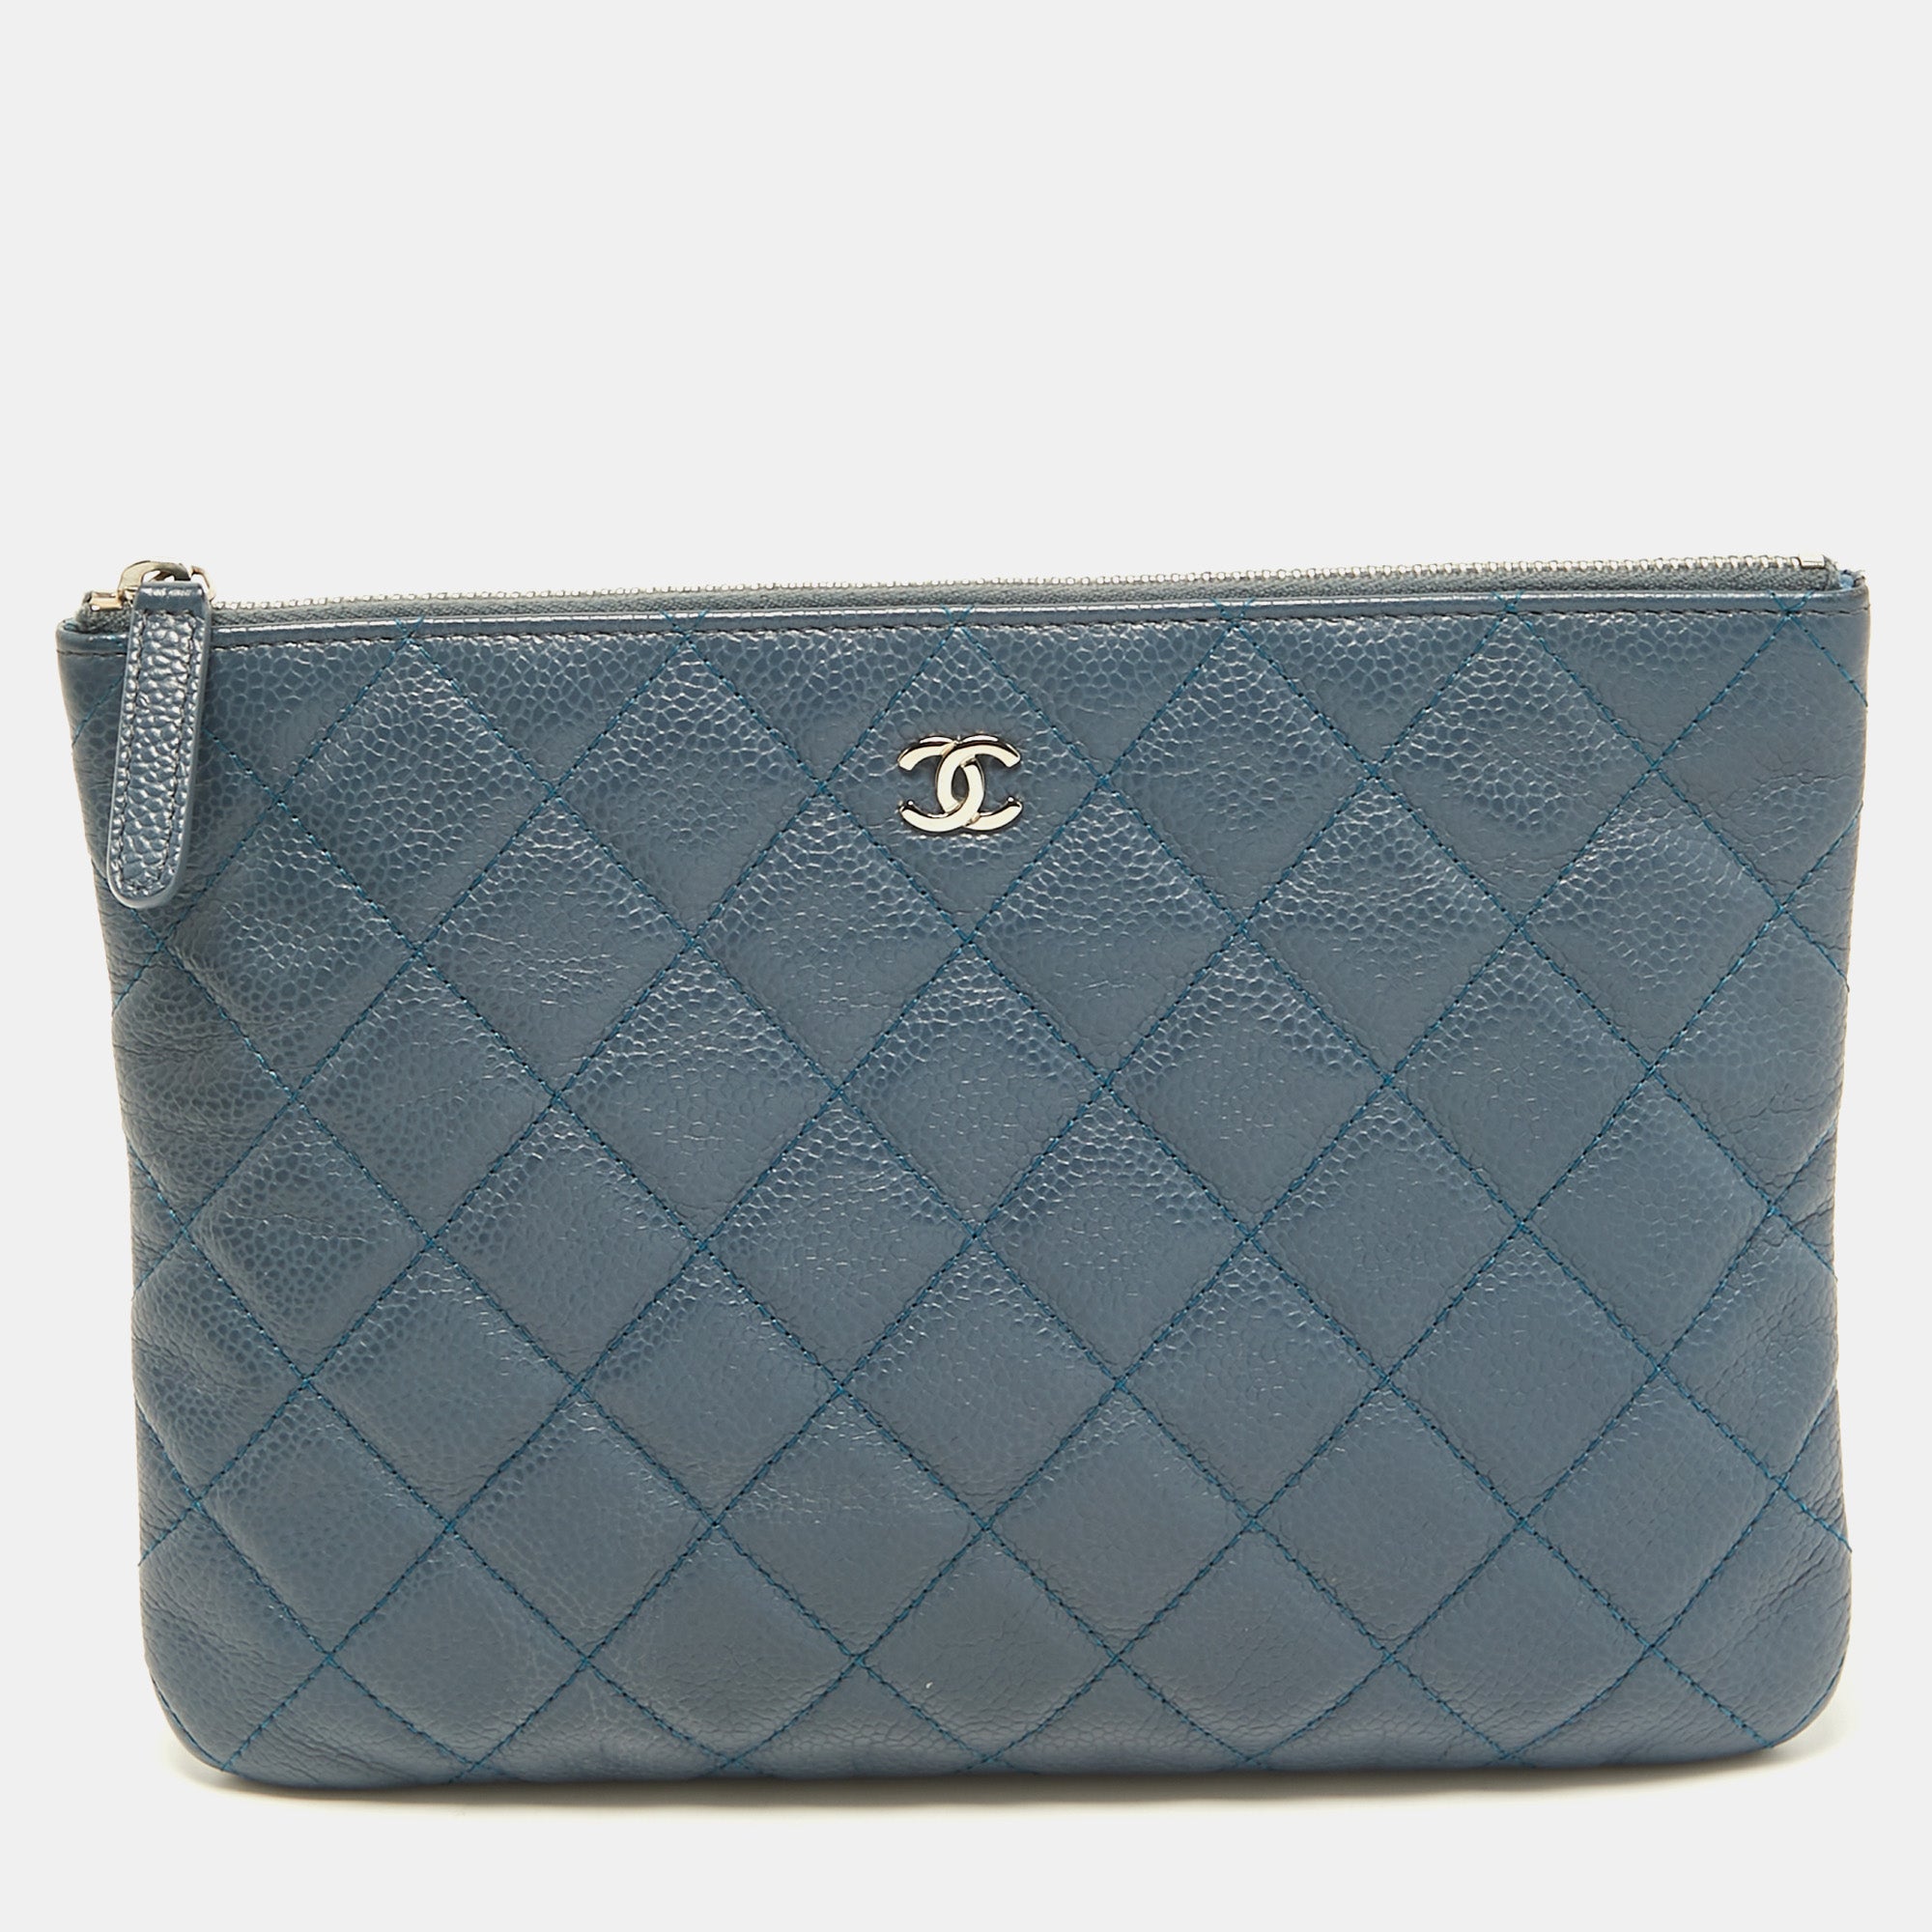 Chanel Blue Quilted Caviar Leather Classic Zip Pouch